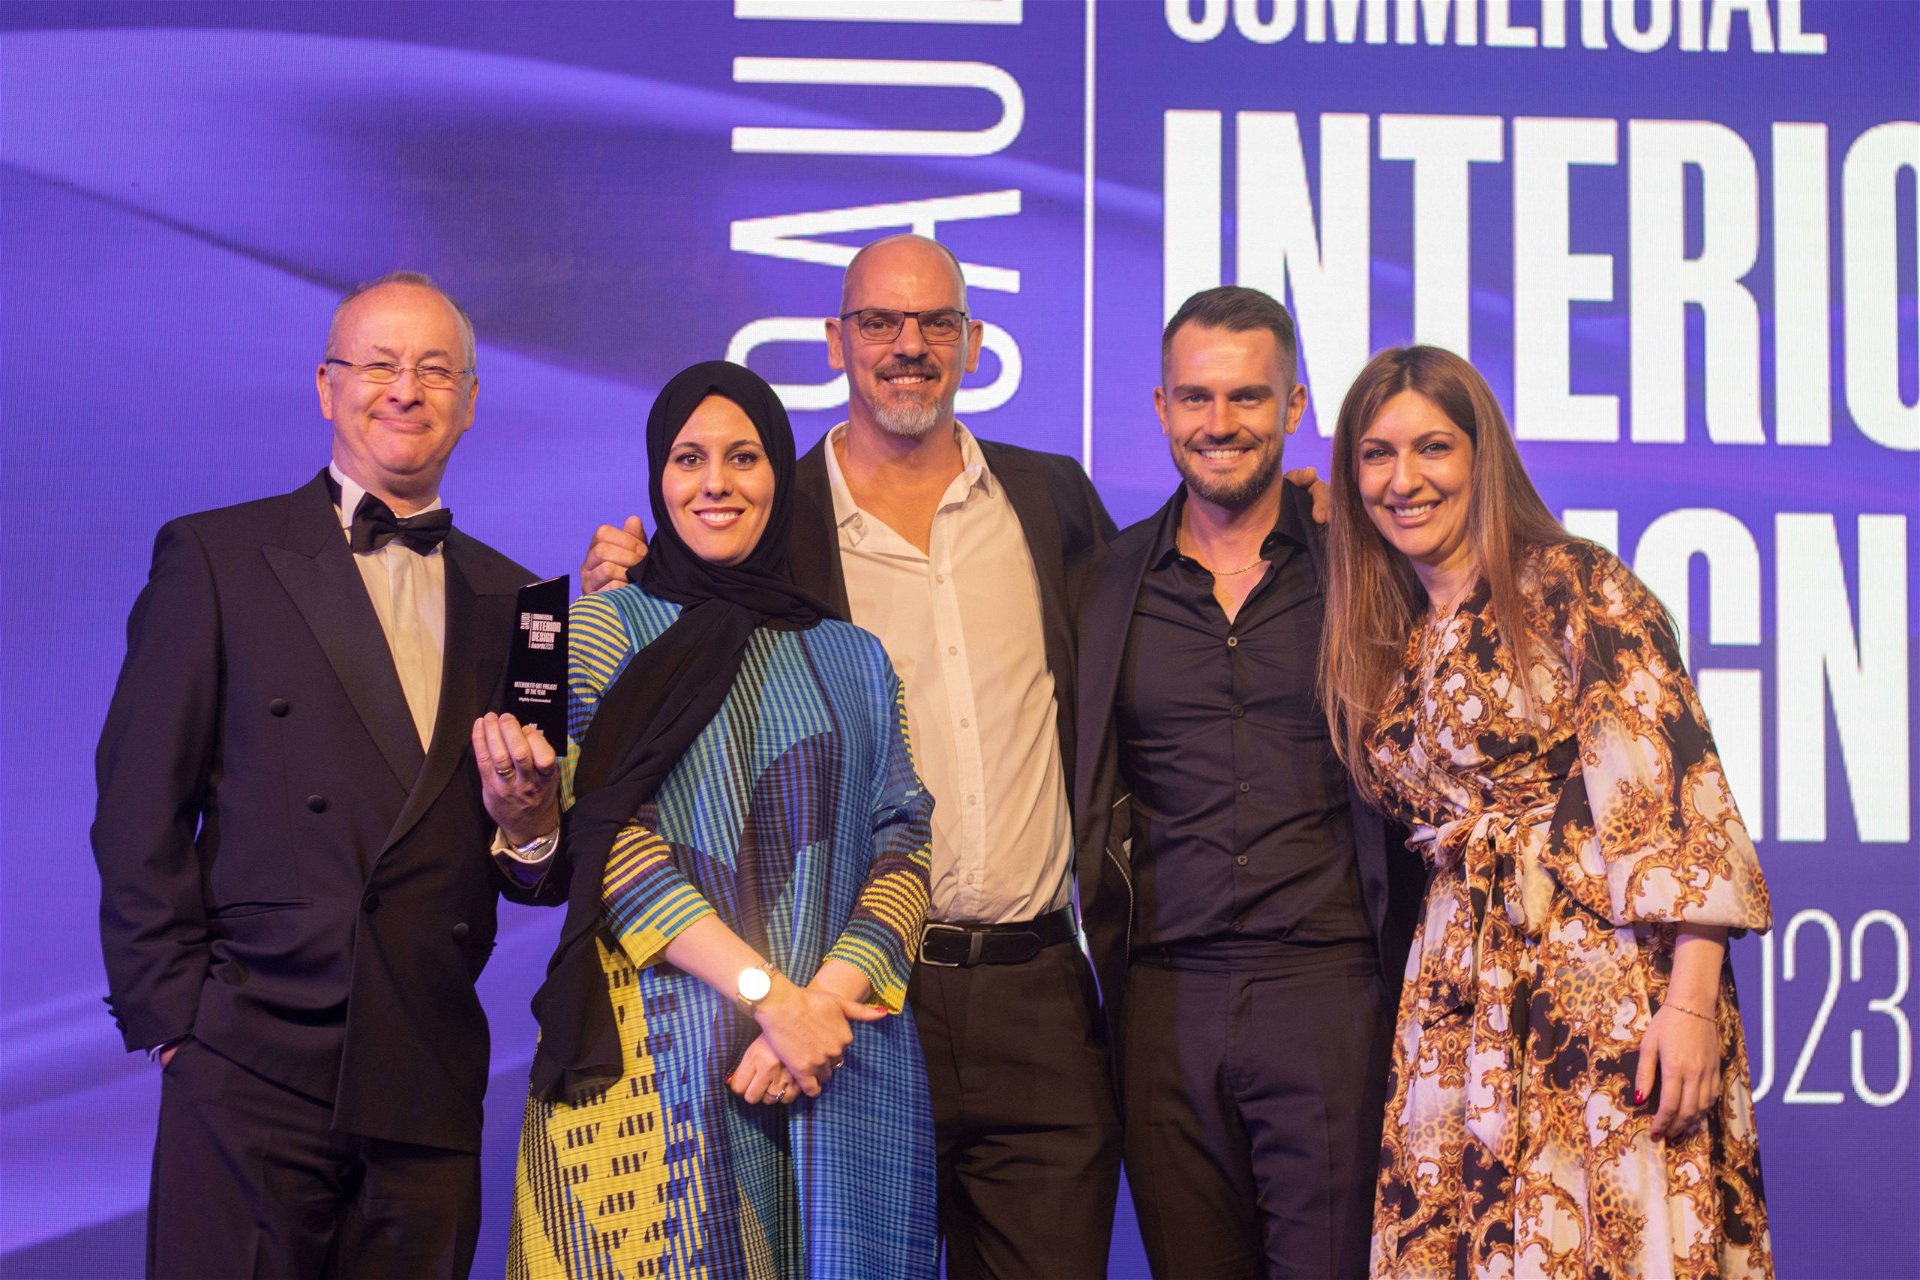 KOJ Interiors wins the CID Award for the Interior Fit-out Contractor Project of the Year!